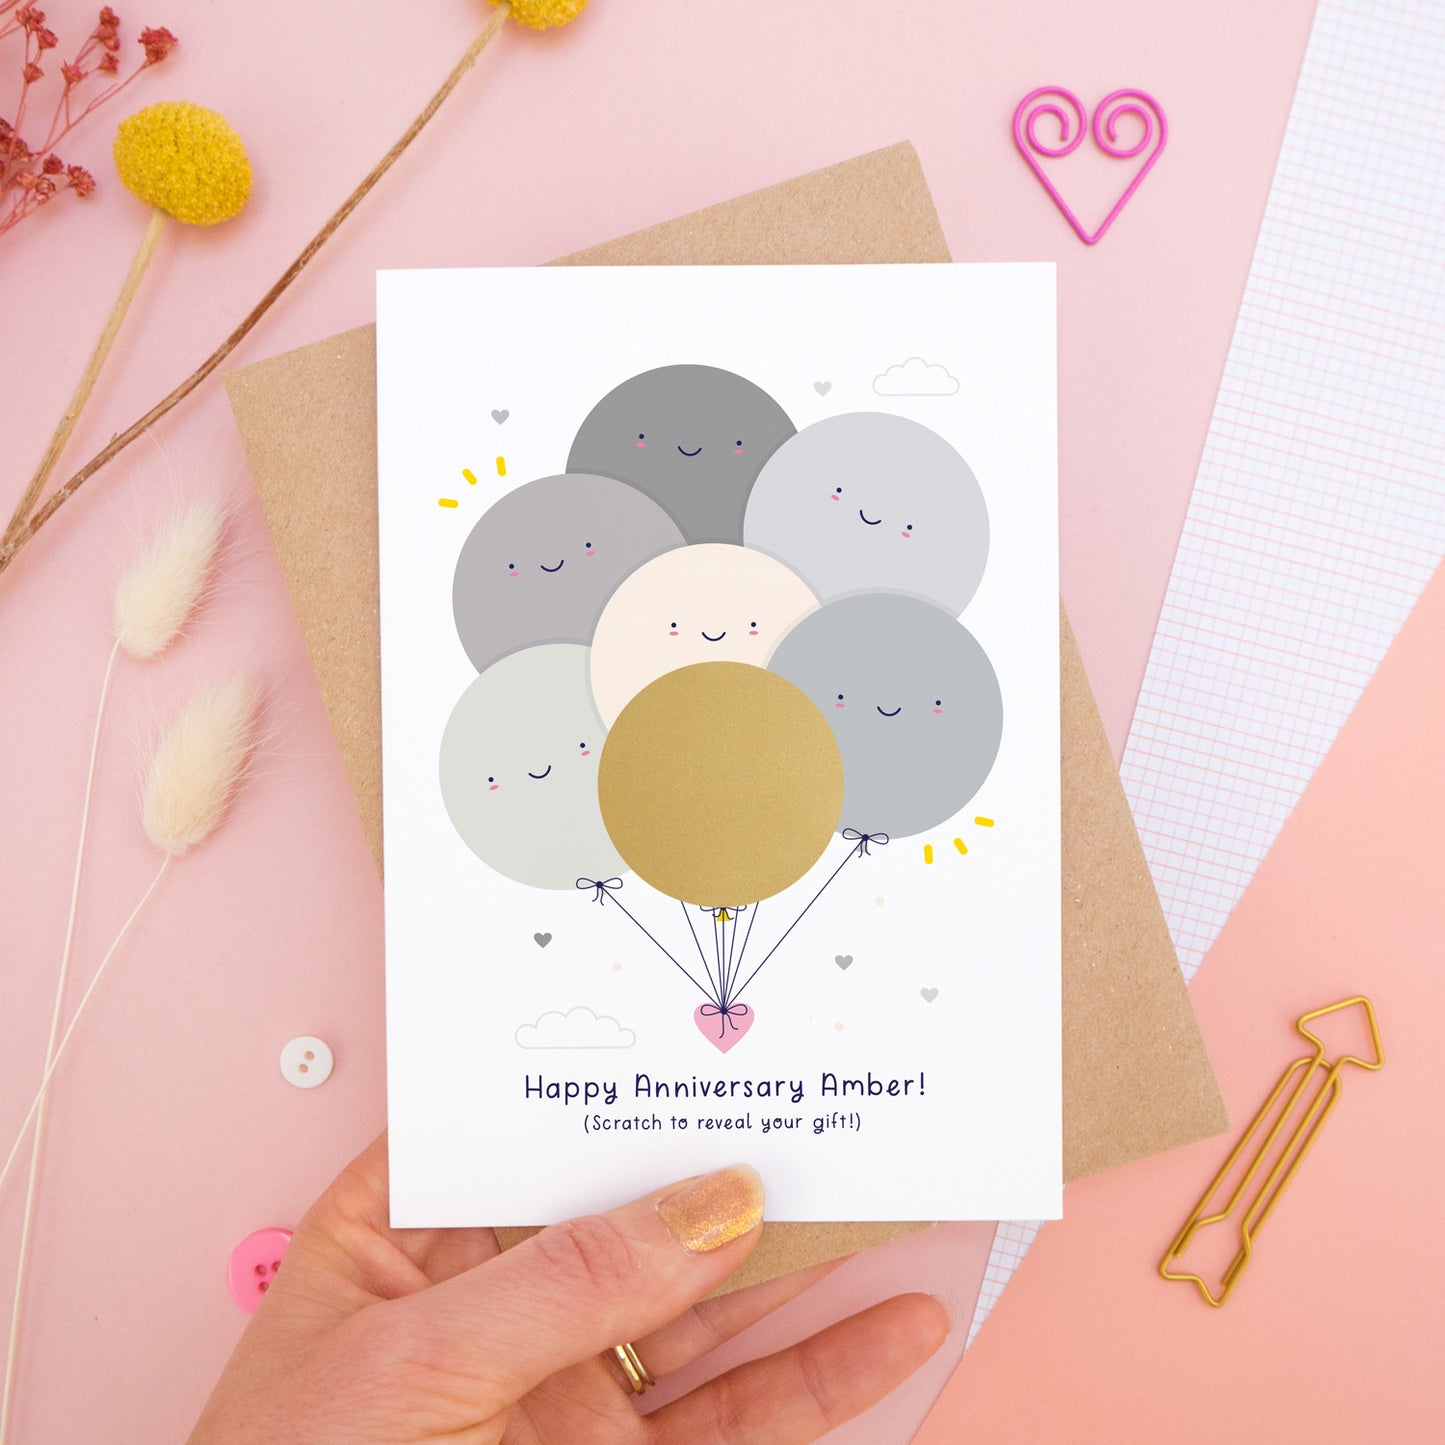 A personalised anniversary scratch card photographed on a pink background with floral props, paper clips, and buttons. This card shows the grey colour scheme and the golden circle has not yet been scratched off to reveal the secret message!